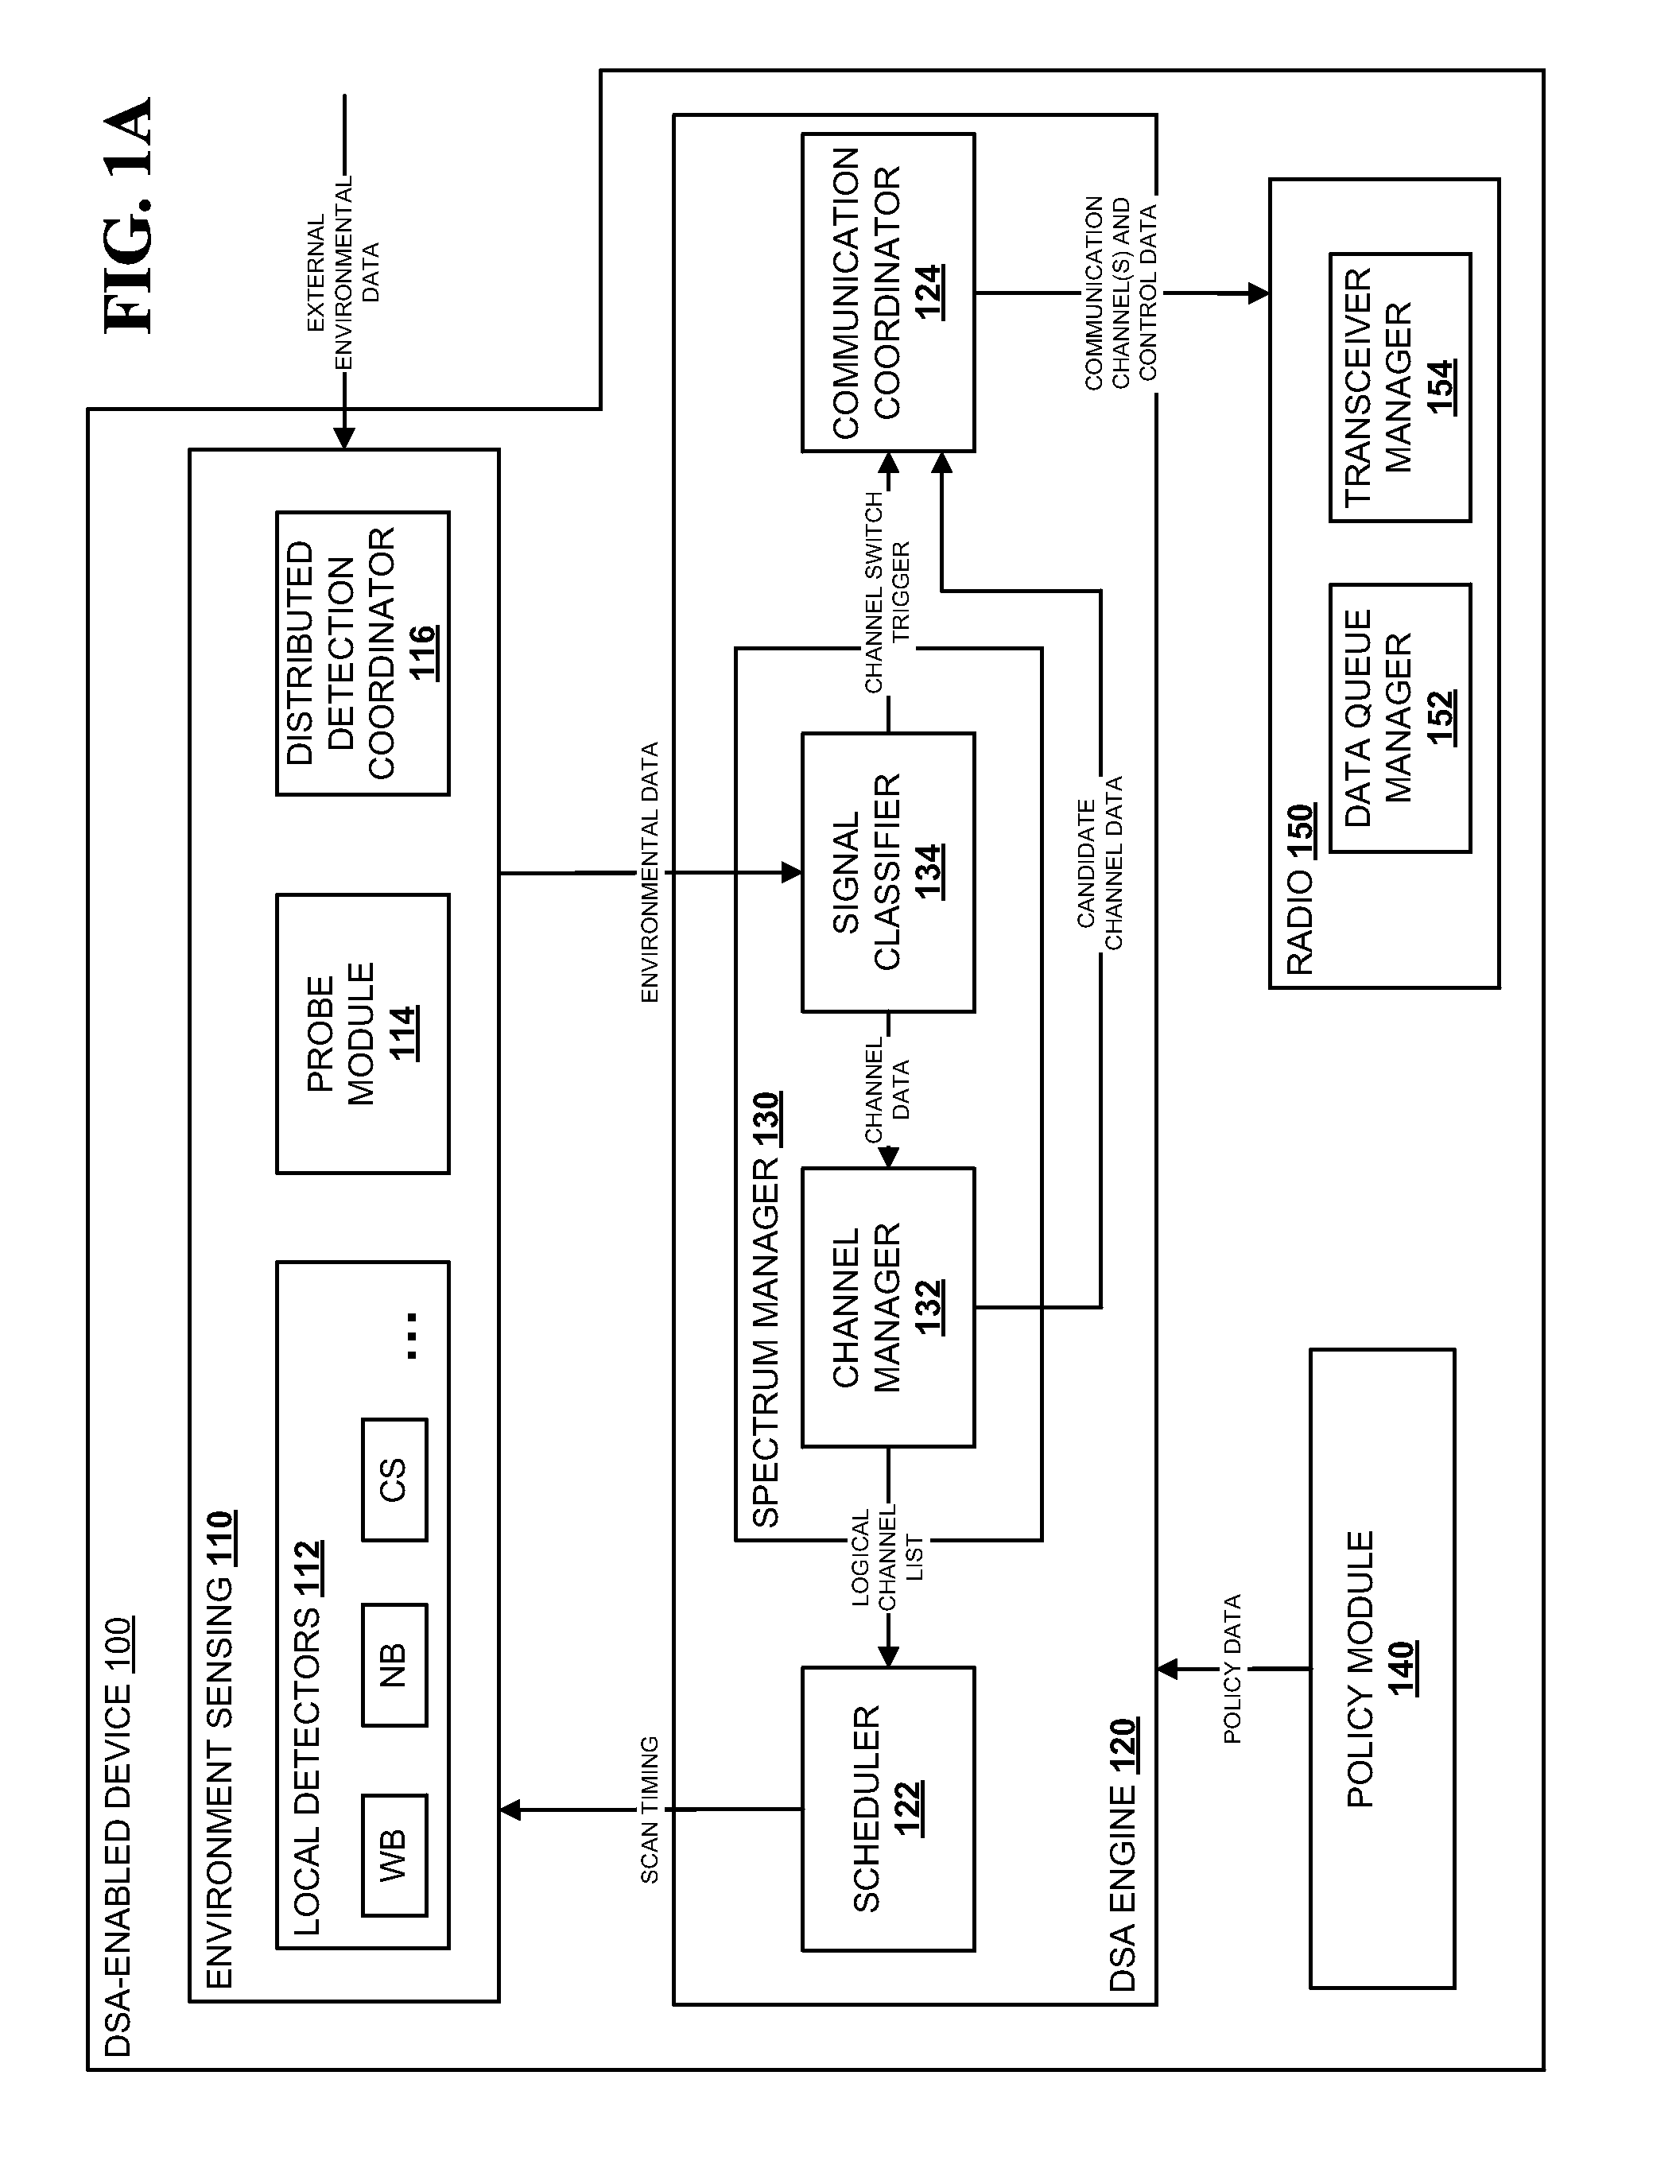 Method and System for Dynamic Spectrum Access Using Specialty Detectors and Improved Networking